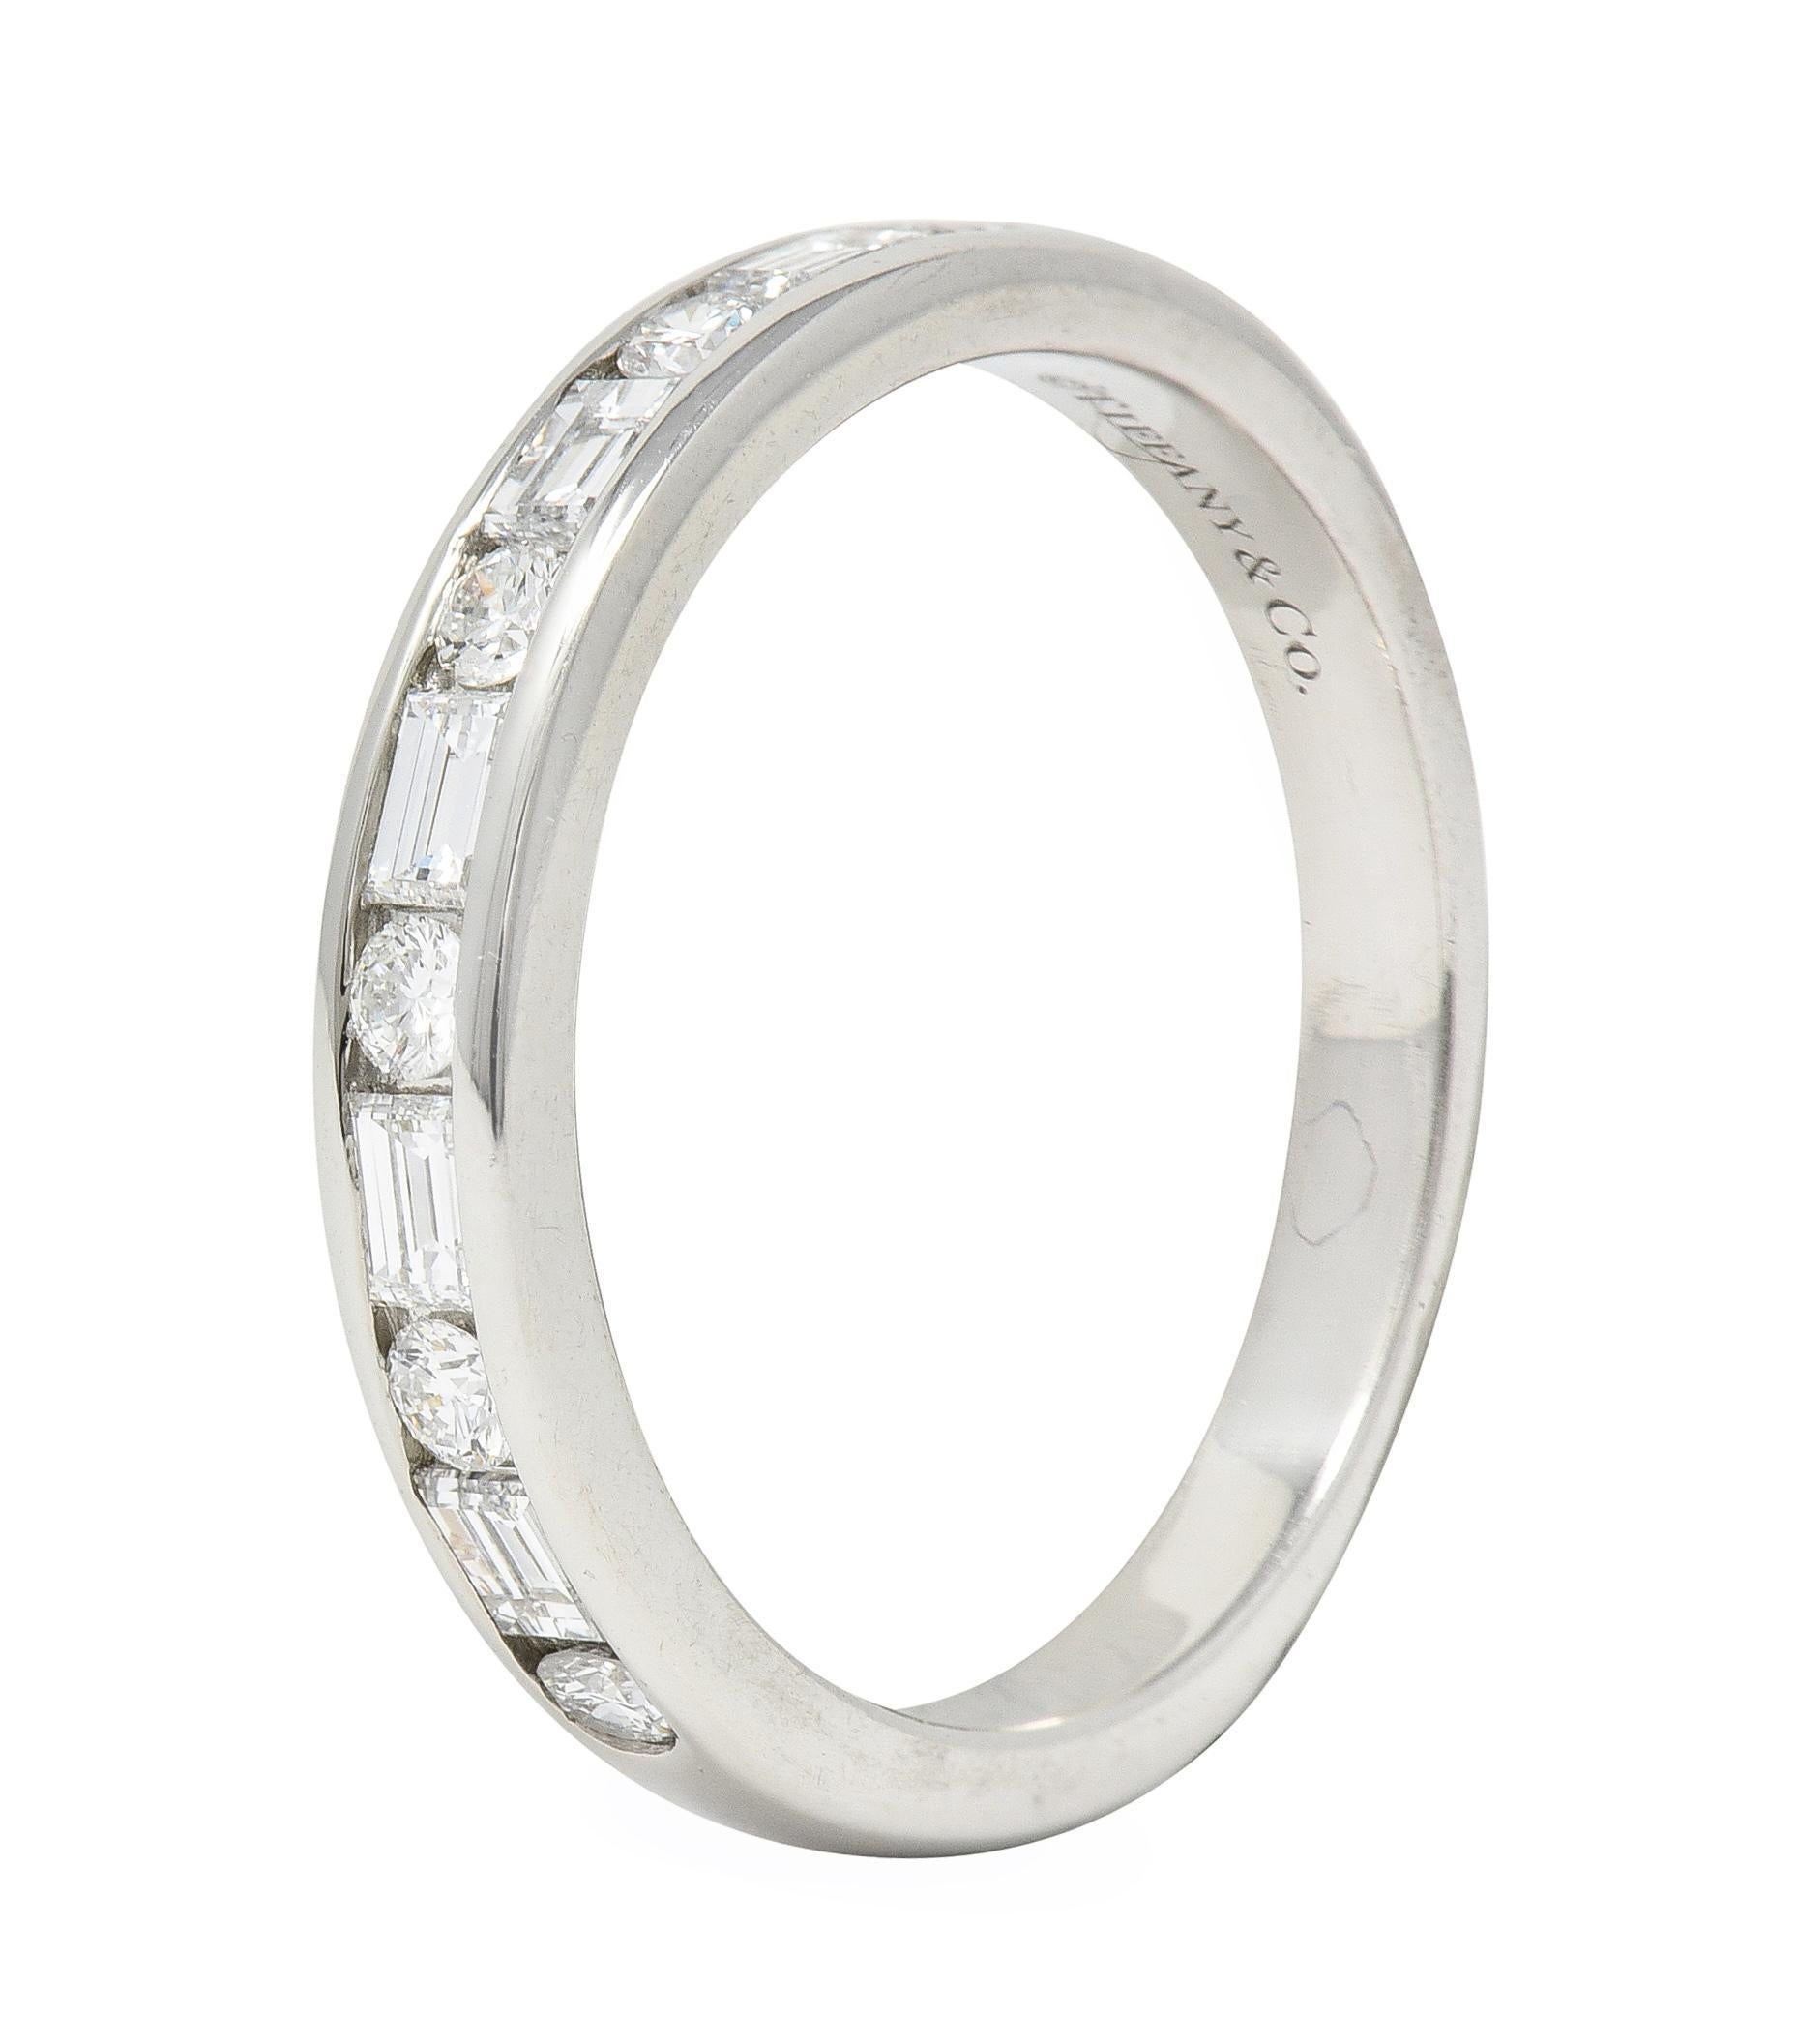 Featuring round brilliant and baguette cut diamonds alternating in pattern
Weighing approximately 0.66 carats total - G color with VS1 clarity
Channel set to front with high polish finish
Stamped for platinum
Fully signed for Tiffany & Co.
Circa: